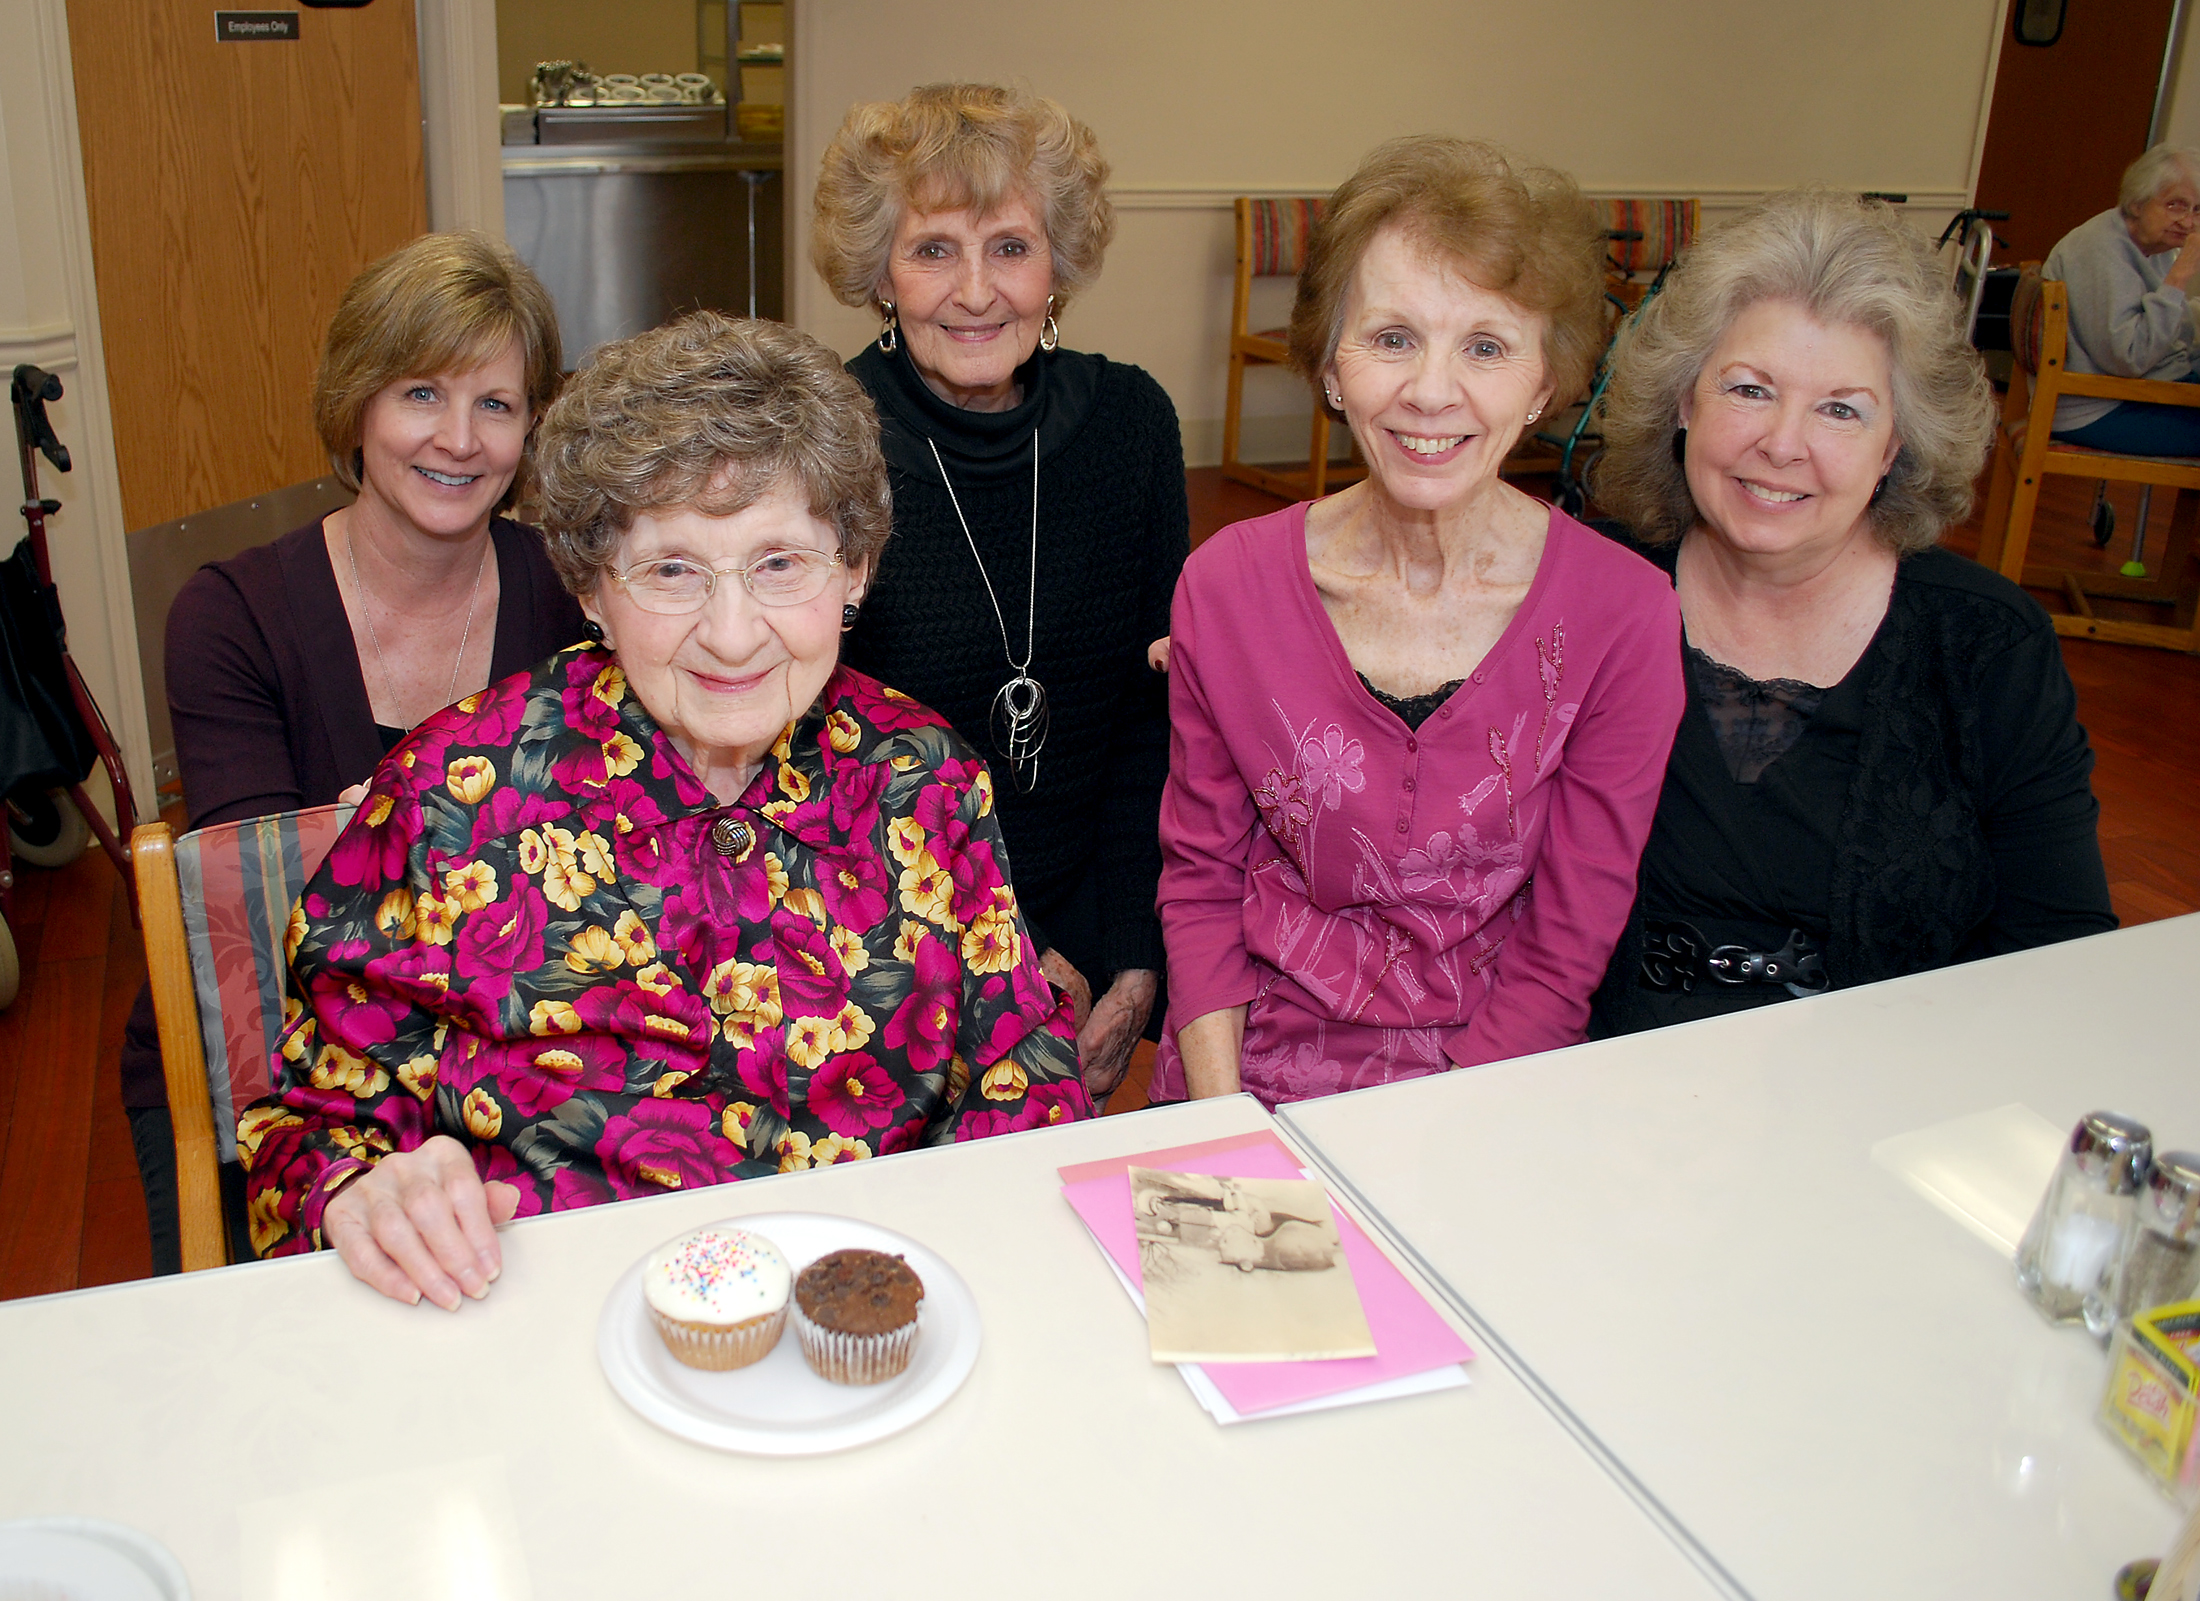 From left: Lori Nicholas, granddaughter; Lucille Robertson; Bonnie Mitchell, niece; and daughters Roberta Elliott and Sharon Sportsman celebrate Robertson’s 100th birthday at Sanders Glen Assisted Living community. (Photo by Robert Herrington)